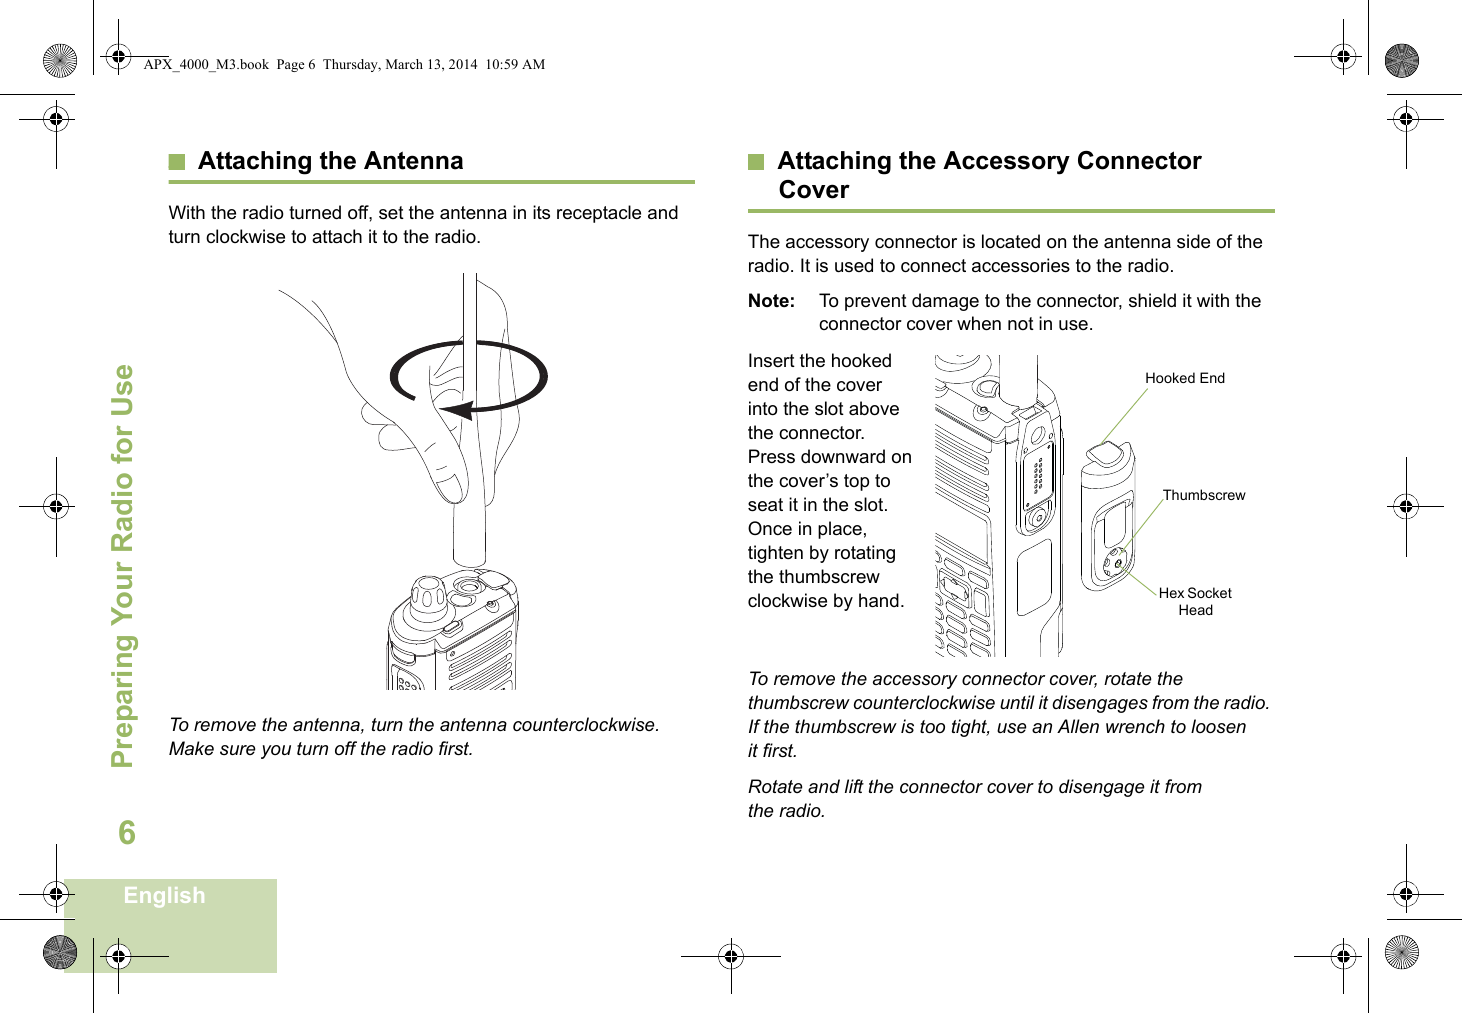 Preparing Your Radio for UseEnglish6Attaching the AntennaWith the radio turned off, set the antenna in its receptacle and turn clockwise to attach it to the radio. To remove the antenna, turn the antenna counterclockwise. Make sure you turn off the radio first.Attaching the Accessory Connector CoverThe accessory connector is located on the antenna side of the radio. It is used to connect accessories to the radio.Note: To prevent damage to the connector, shield it with the connector cover when not in use.Insert the hooked end of the cover into the slot above the connector. Press downward on the cover’s top to seat it in the slot. Once in place, tighten by rotating the thumbscrew clockwise by hand.  To remove the accessory connector cover, rotate the thumbscrew counterclockwise until it disengages from the radio. If the thumbscrew is too tight, use an Allen wrench to loosen it first.Rotate and lift the connector cover to disengage it from the radio.Hooked EndThumbscrewHex Socket HeadAPX_4000_M3.book  Page 6  Thursday, March 13, 2014  10:59 AM